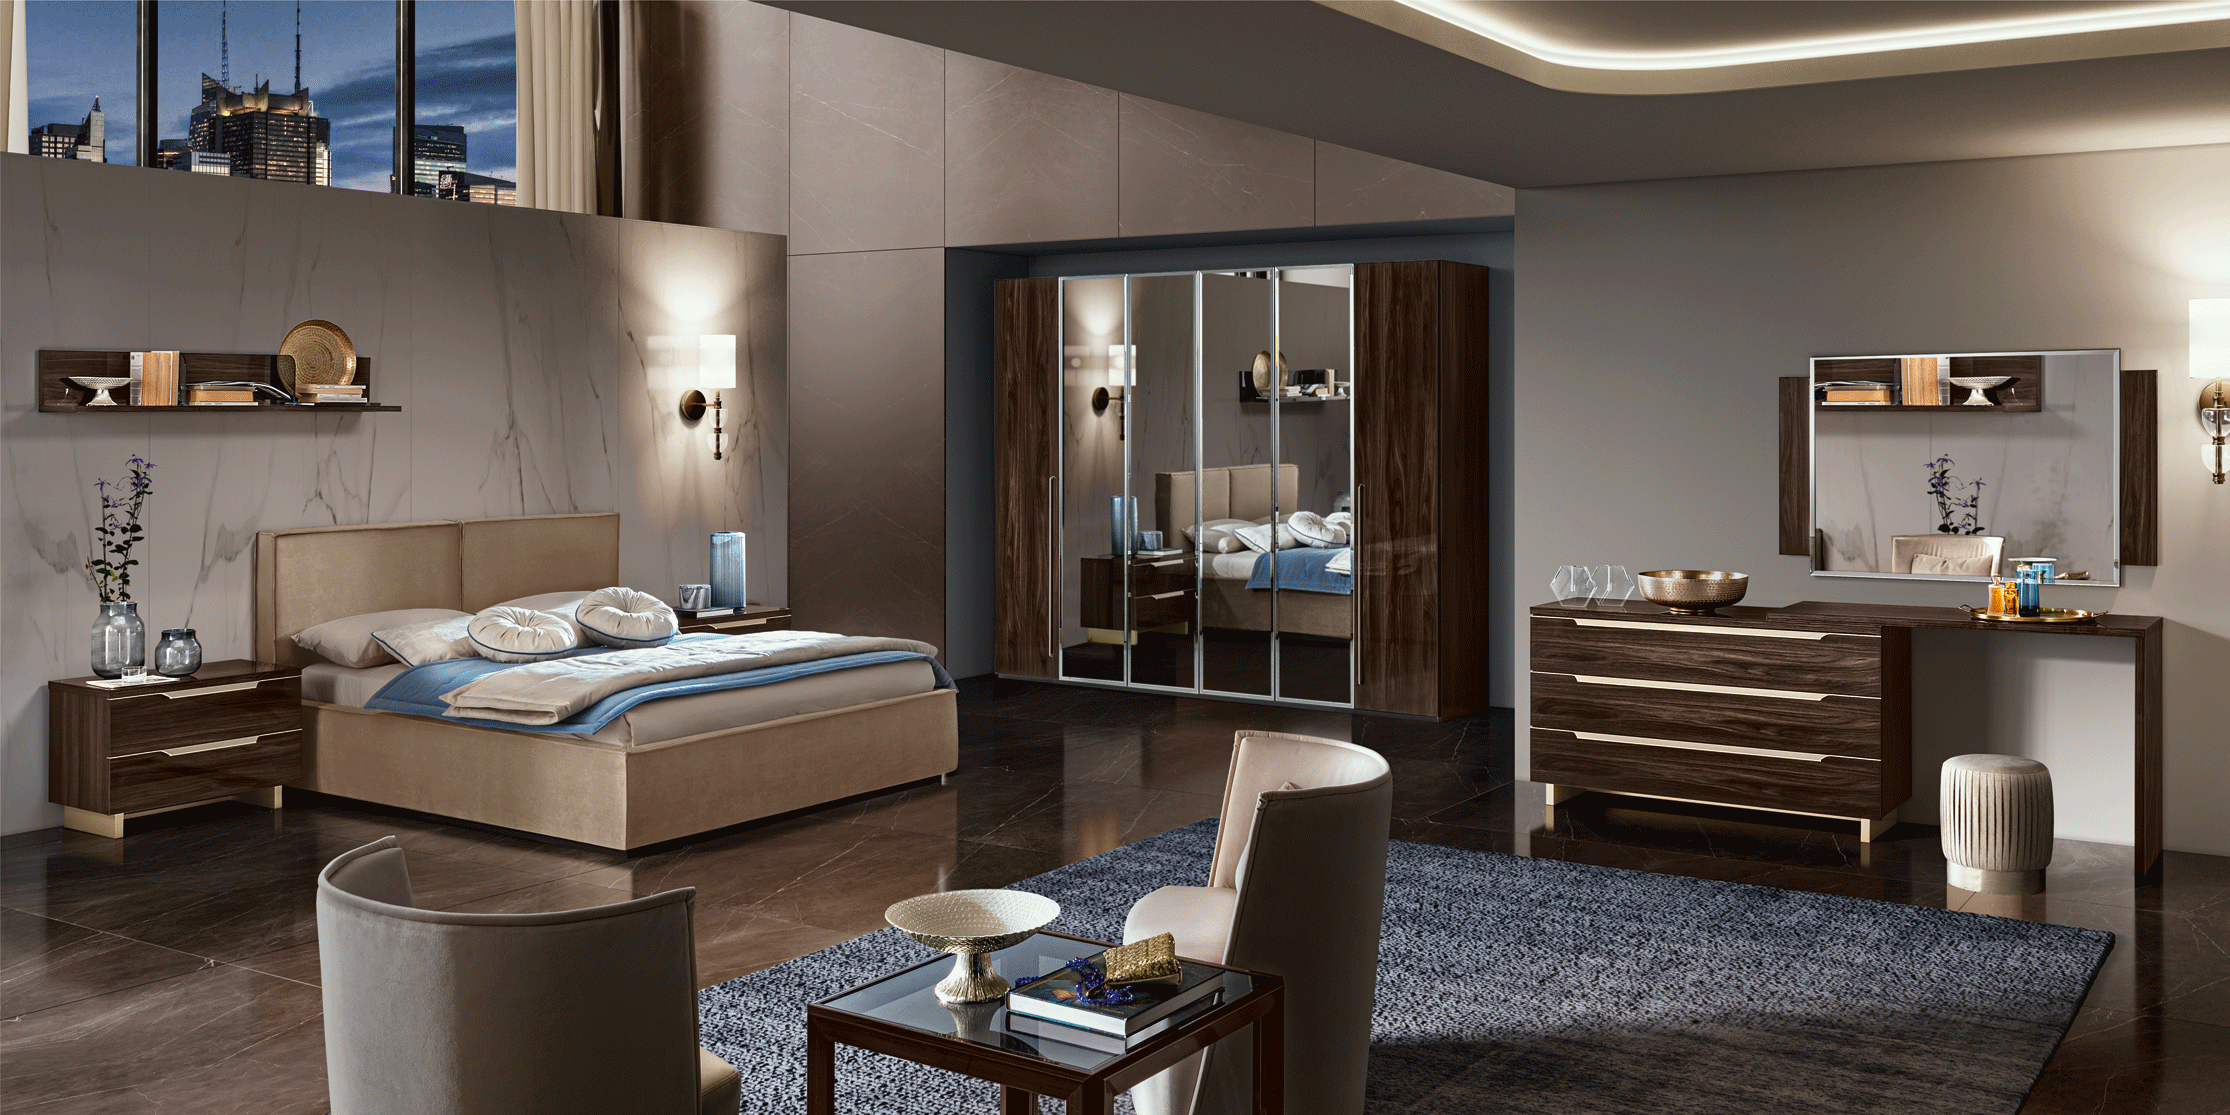 Wallunits Hallway Console tables and Mirrors Smart Bedgroup Walnut Additional items